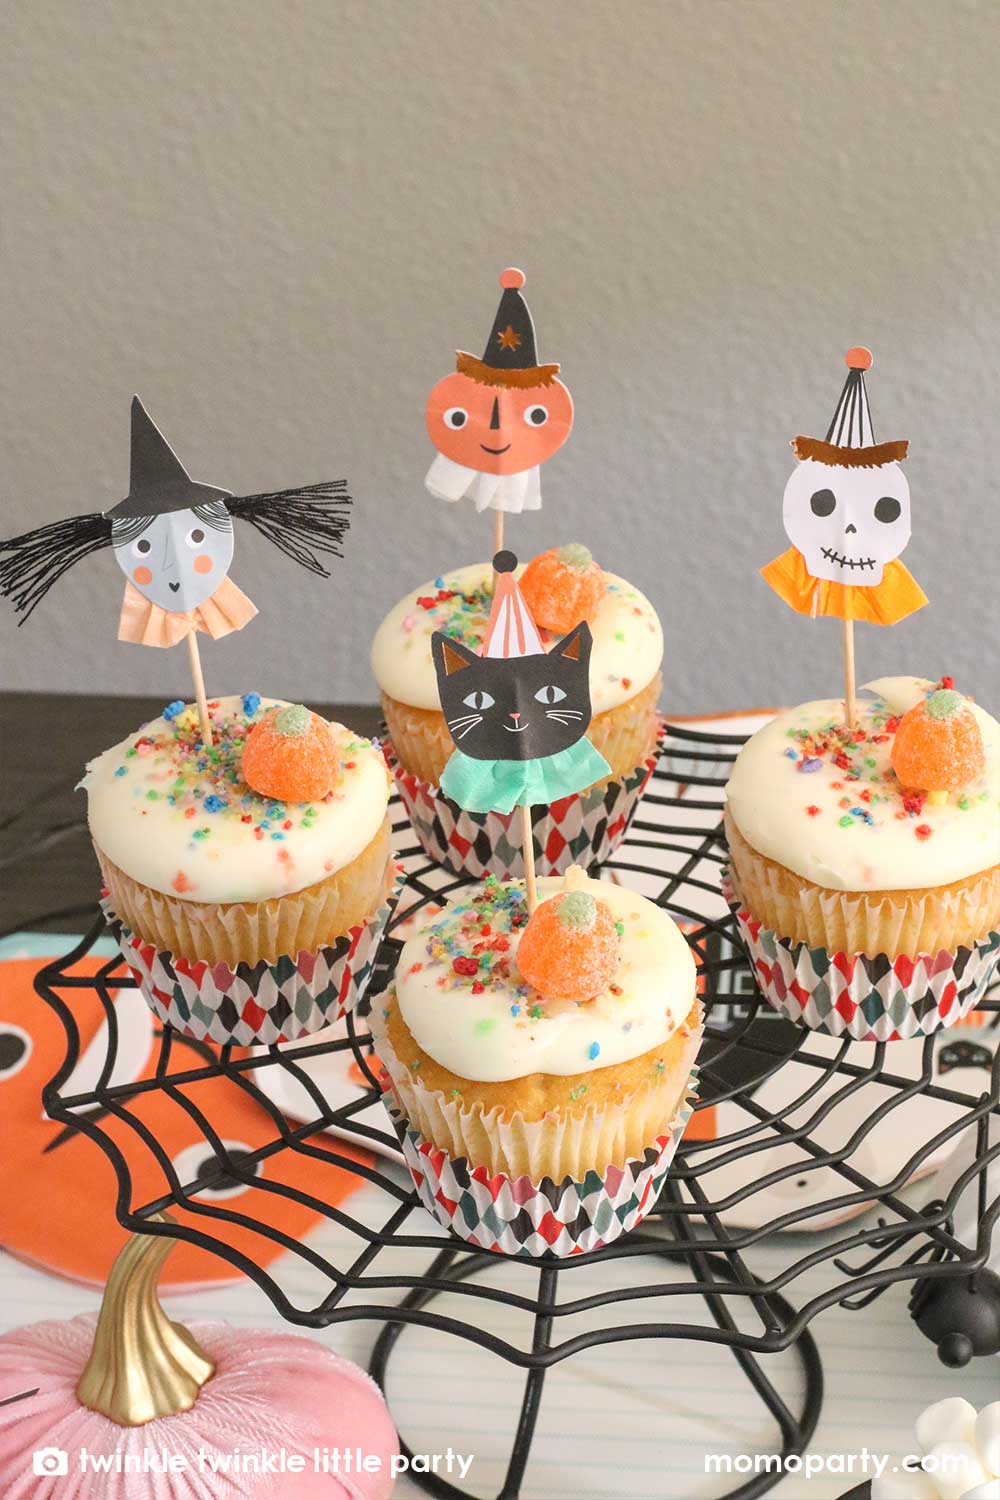  Kid's Halloween party table filled with Halloween themed party supplies including a set of cupcakes decorated with Halloween character toppers including a black cat, a skull, a pumpkin, and a witch on a spider cobweb shaped cupcake stand, creating a spooky vibe for this Halloween season!